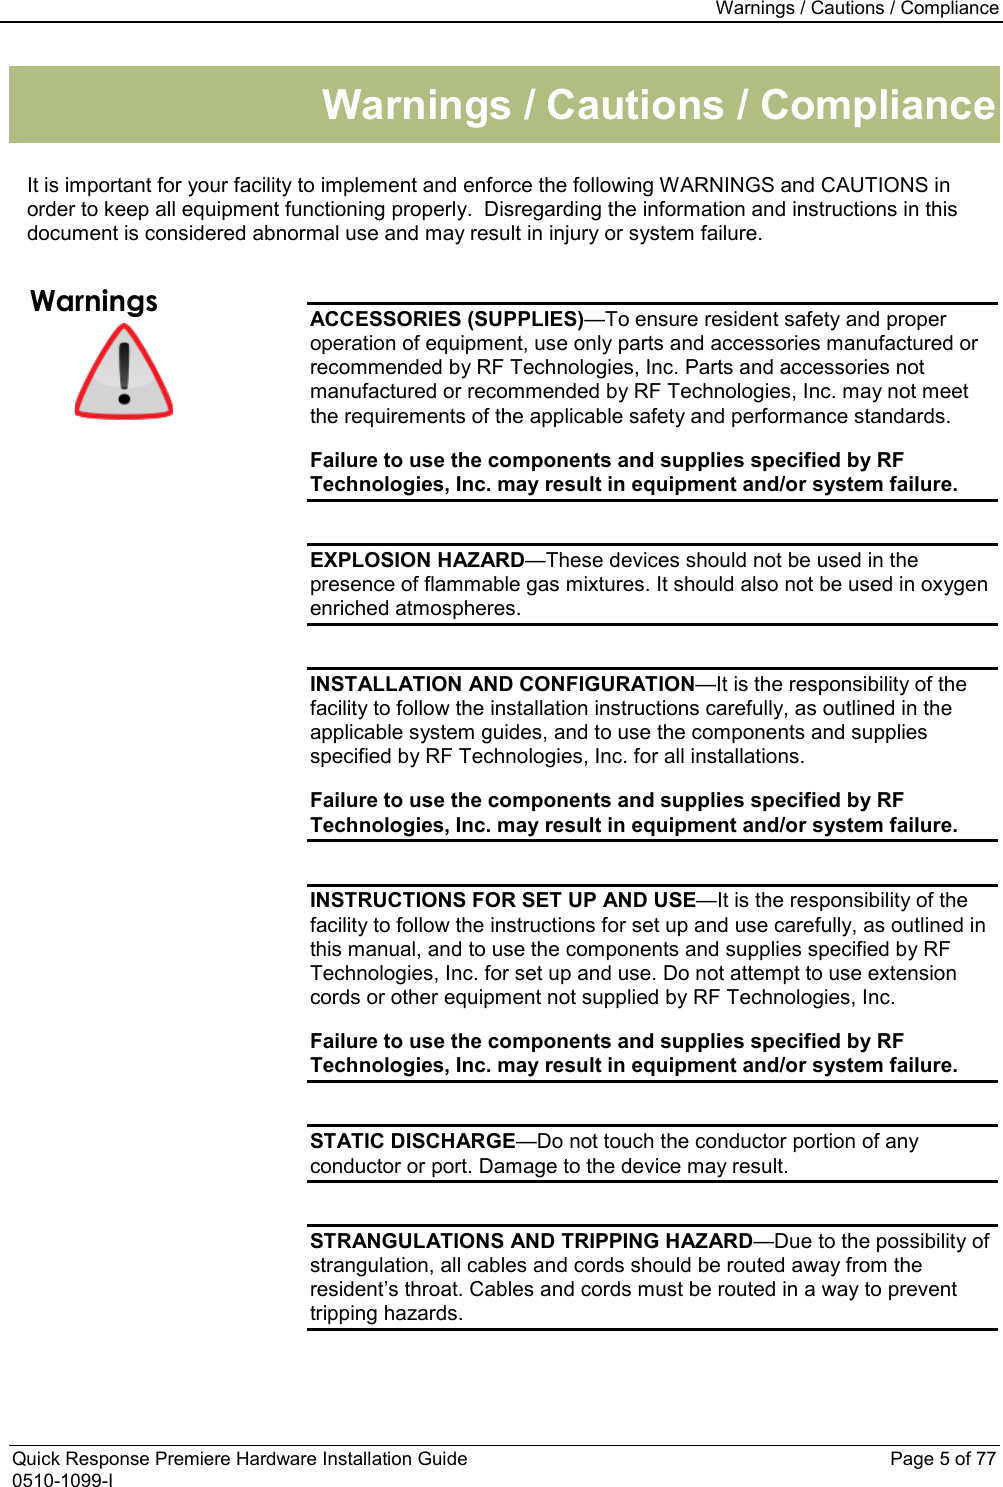 Warnings / Cautions / Compliance  Quick Response Premiere Hardware Installation Guide    Page 5 of 77 0510-1099-I Warnings / Cautions / Compliance  It is important for your facility to implement and enforce the following WARNINGS and CAUTIONS in order to keep all equipment functioning properly.  Disregarding the information and instructions in this document is considered abnormal use and may result in injury or system failure.  Warnings  ACCESSORIES (SUPPLIES)—To ensure resident safety and proper operation of equipment, use only parts and accessories manufactured or recommended by RF Technologies, Inc. Parts and accessories not manufactured or recommended by RF Technologies, Inc. may not meet the requirements of the applicable safety and performance standards. Failure to use the components and supplies specified by RF Technologies, Inc. may result in equipment and/or system failure.  EXPLOSION HAZARD—These devices should not be used in the presence of flammable gas mixtures. It should also not be used in oxygen enriched atmospheres.  INSTALLATION AND CONFIGURATION—It is the responsibility of the facility to follow the installation instructions carefully, as outlined in the applicable system guides, and to use the components and supplies specified by RF Technologies, Inc. for all installations. Failure to use the components and supplies specified by RF Technologies, Inc. may result in equipment and/or system failure.  INSTRUCTIONS FOR SET UP AND USE—It is the responsibility of the facility to follow the instructions for set up and use carefully, as outlined in this manual, and to use the components and supplies specified by RF Technologies, Inc. for set up and use. Do not attempt to use extension cords or other equipment not supplied by RF Technologies, Inc. Failure to use the components and supplies specified by RF Technologies, Inc. may result in equipment and/or system failure.  STATIC DISCHARGE—Do not touch the conductor portion of any conductor or port. Damage to the device may result.  STRANGULATIONS AND TRIPPING HAZARD—Due to the possibility of strangulation, all cables and cords should be routed away from the resident’s throat. Cables and cords must be routed in a way to prevent tripping hazards. 